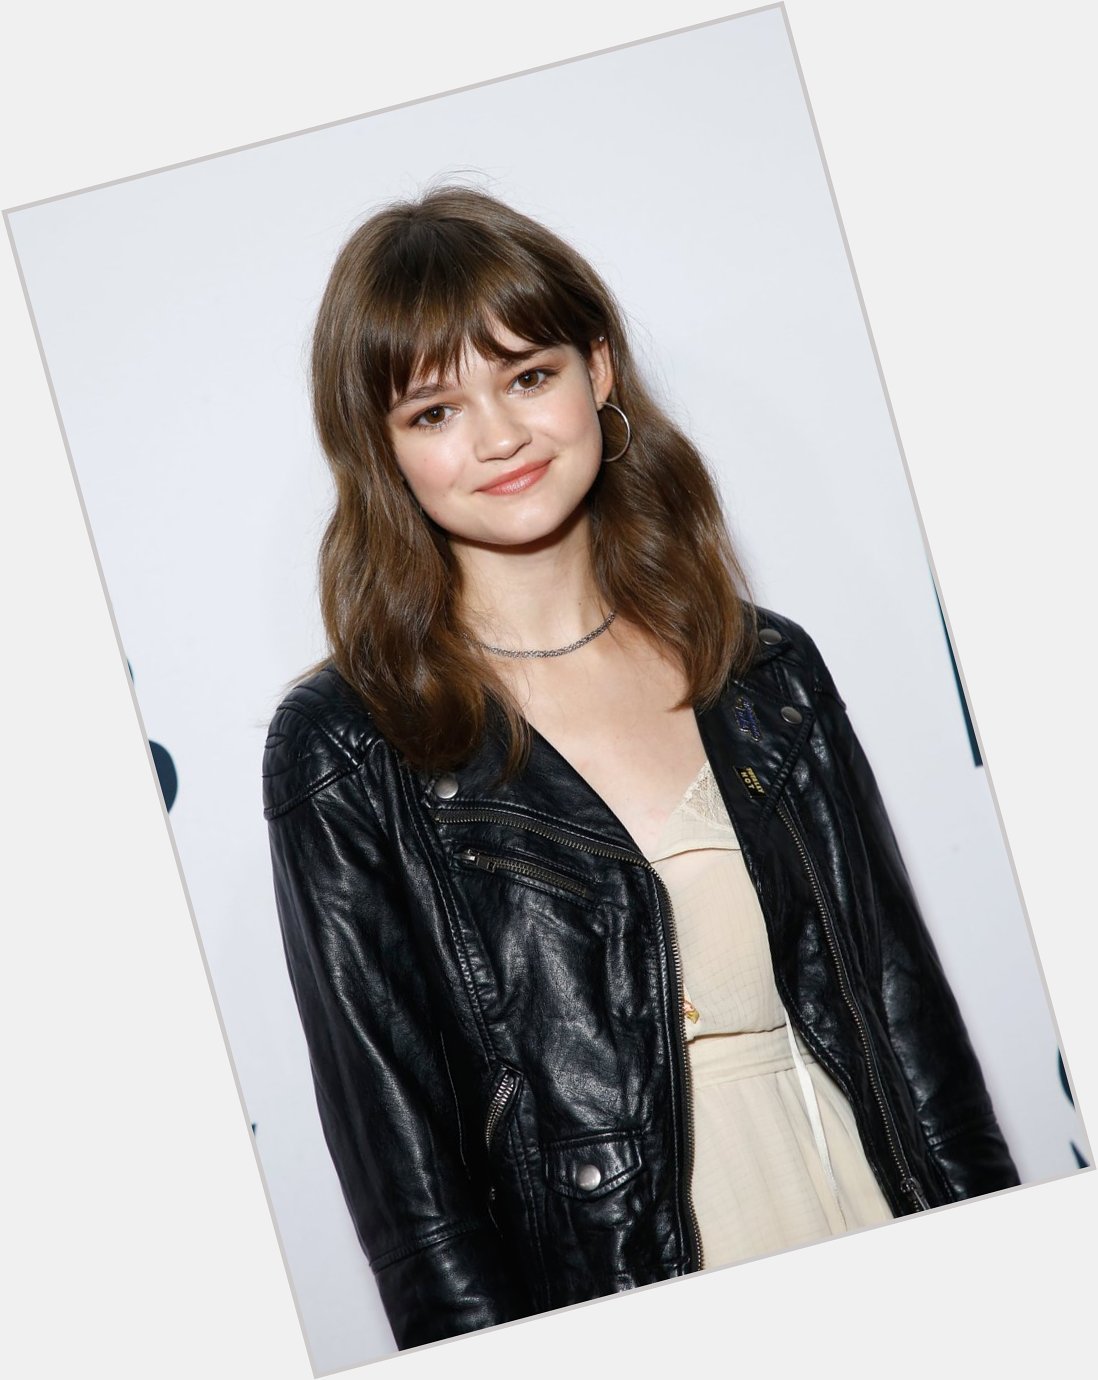 Happy 25th birthday to (Ciara Bravo)! The actress who played Katie Knight from 